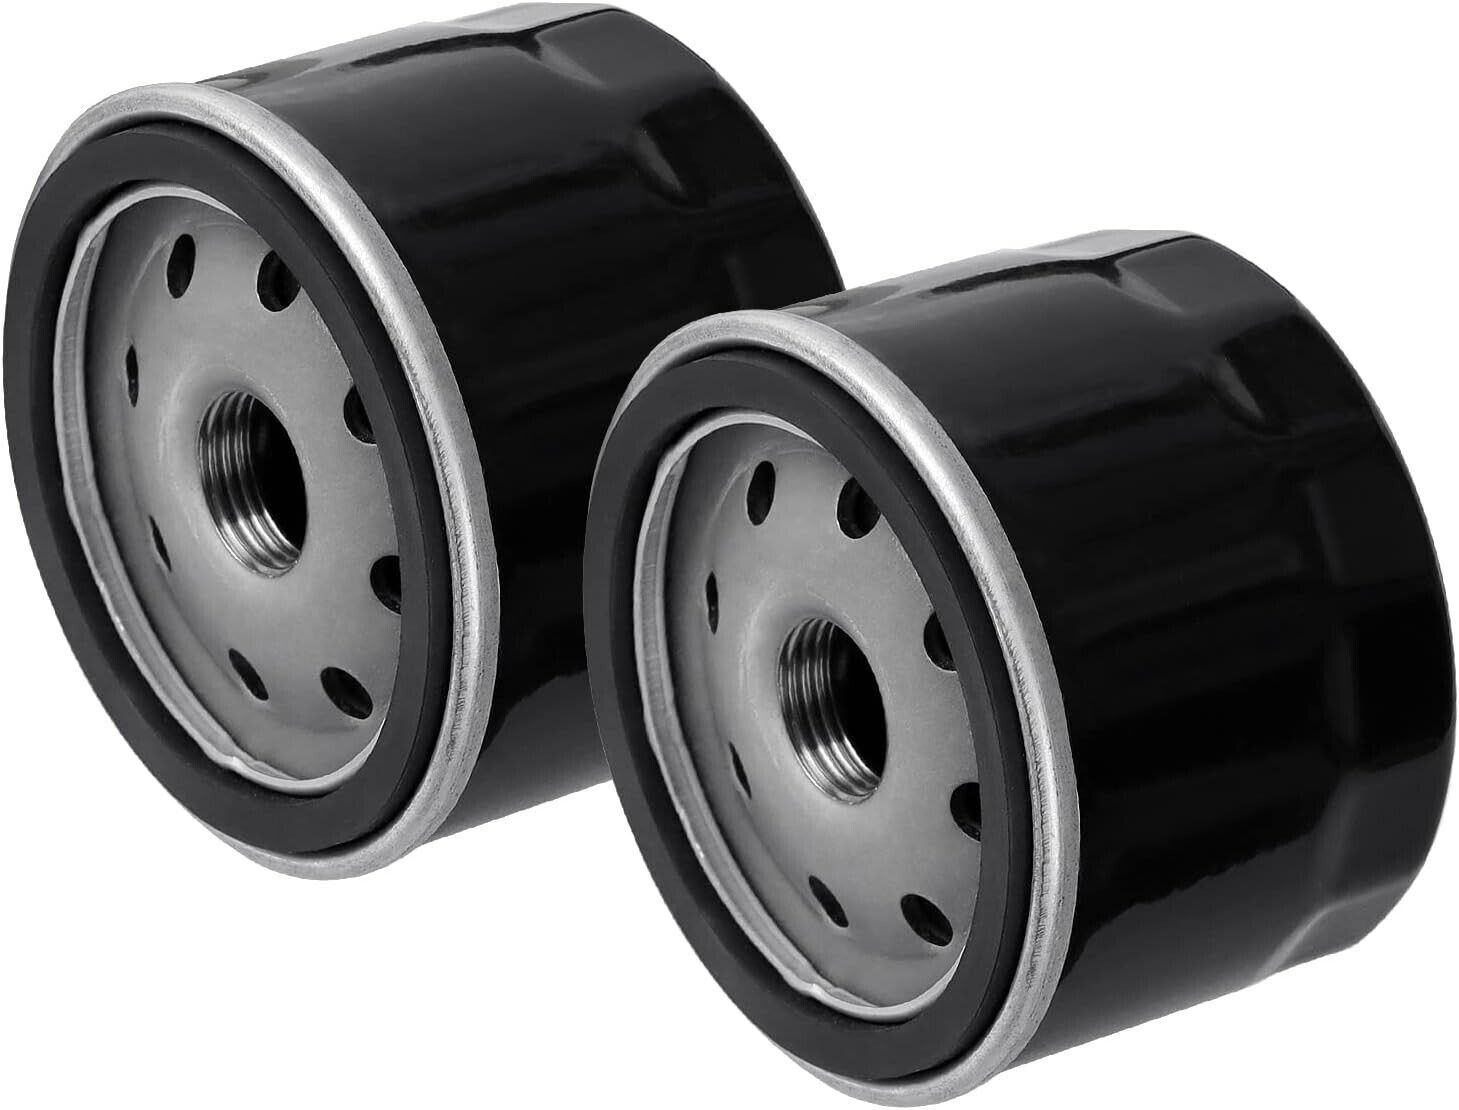 AM125424 Oil Filter for John Deere GY20577 Briggs & Stratton 492932S (2 Pack)